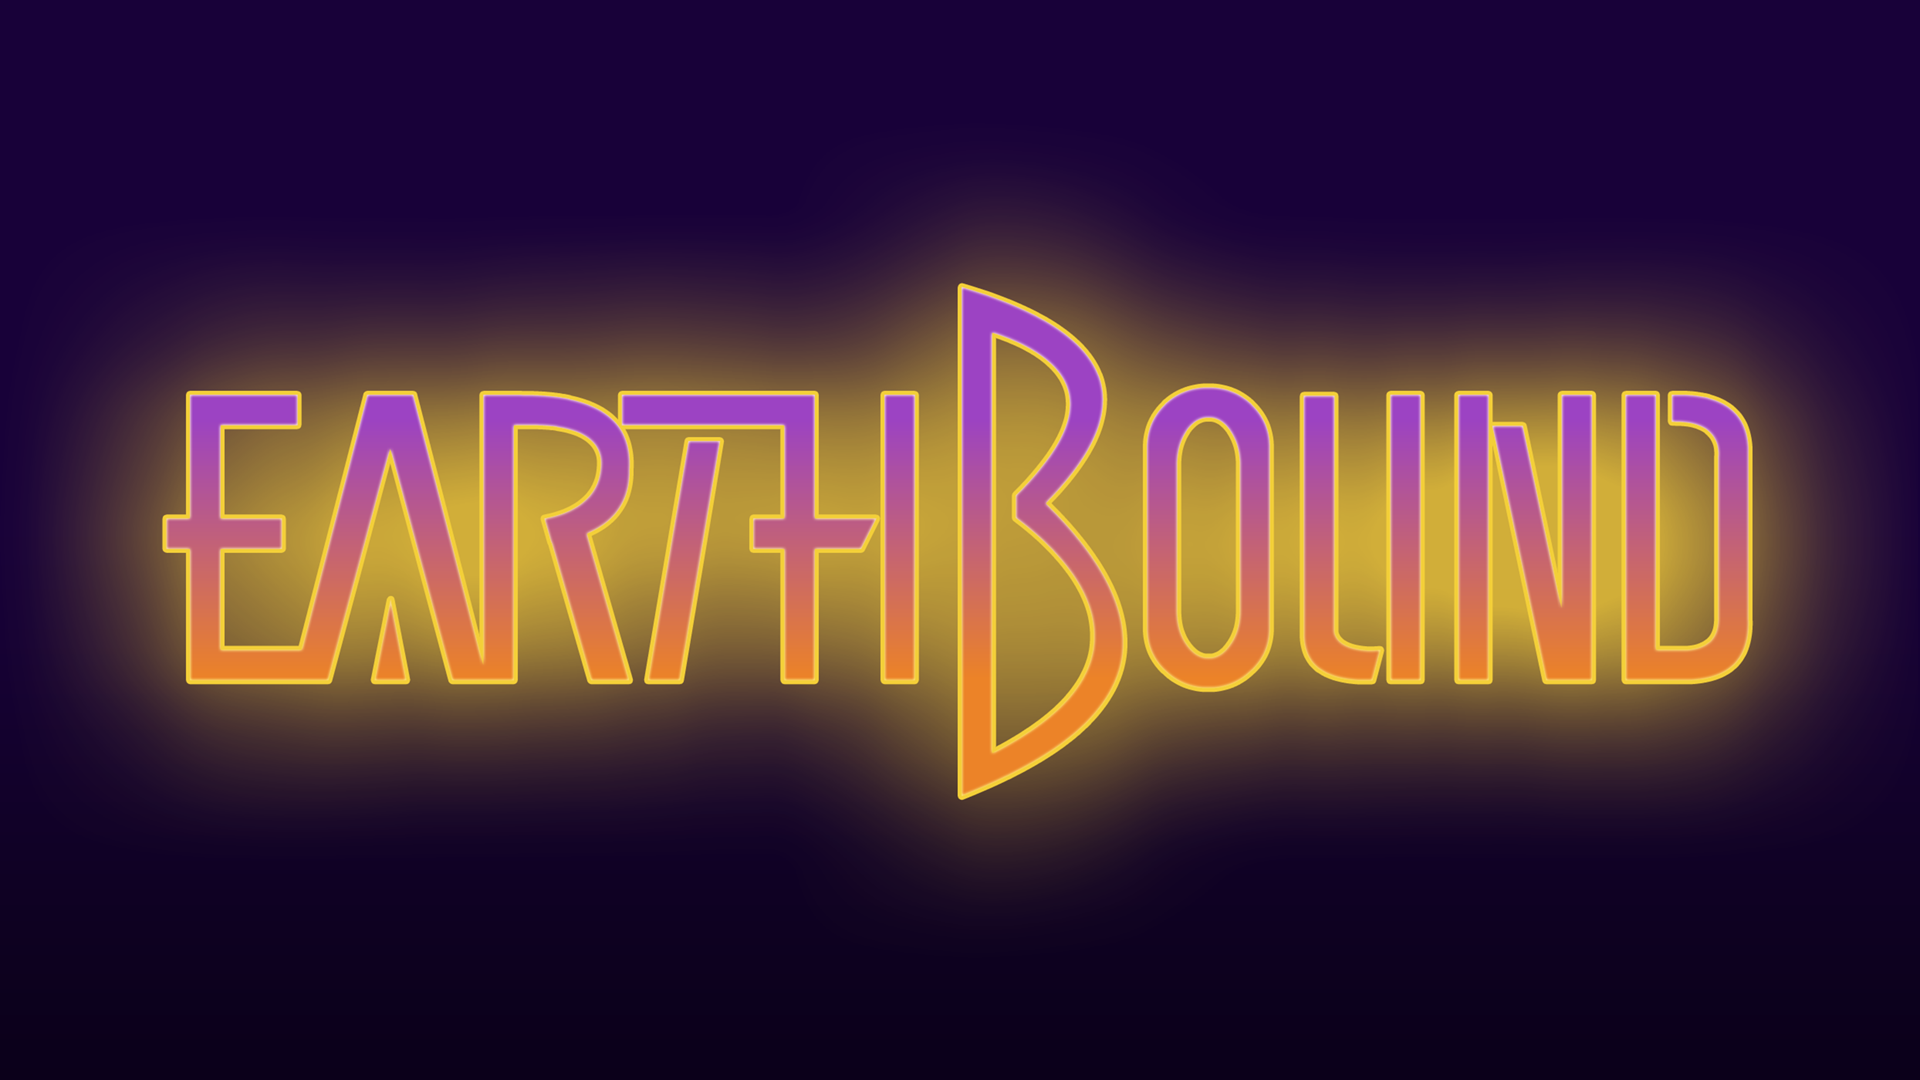 Earthbound Logo Wallpaper 1920x1080 by hocotate civ on